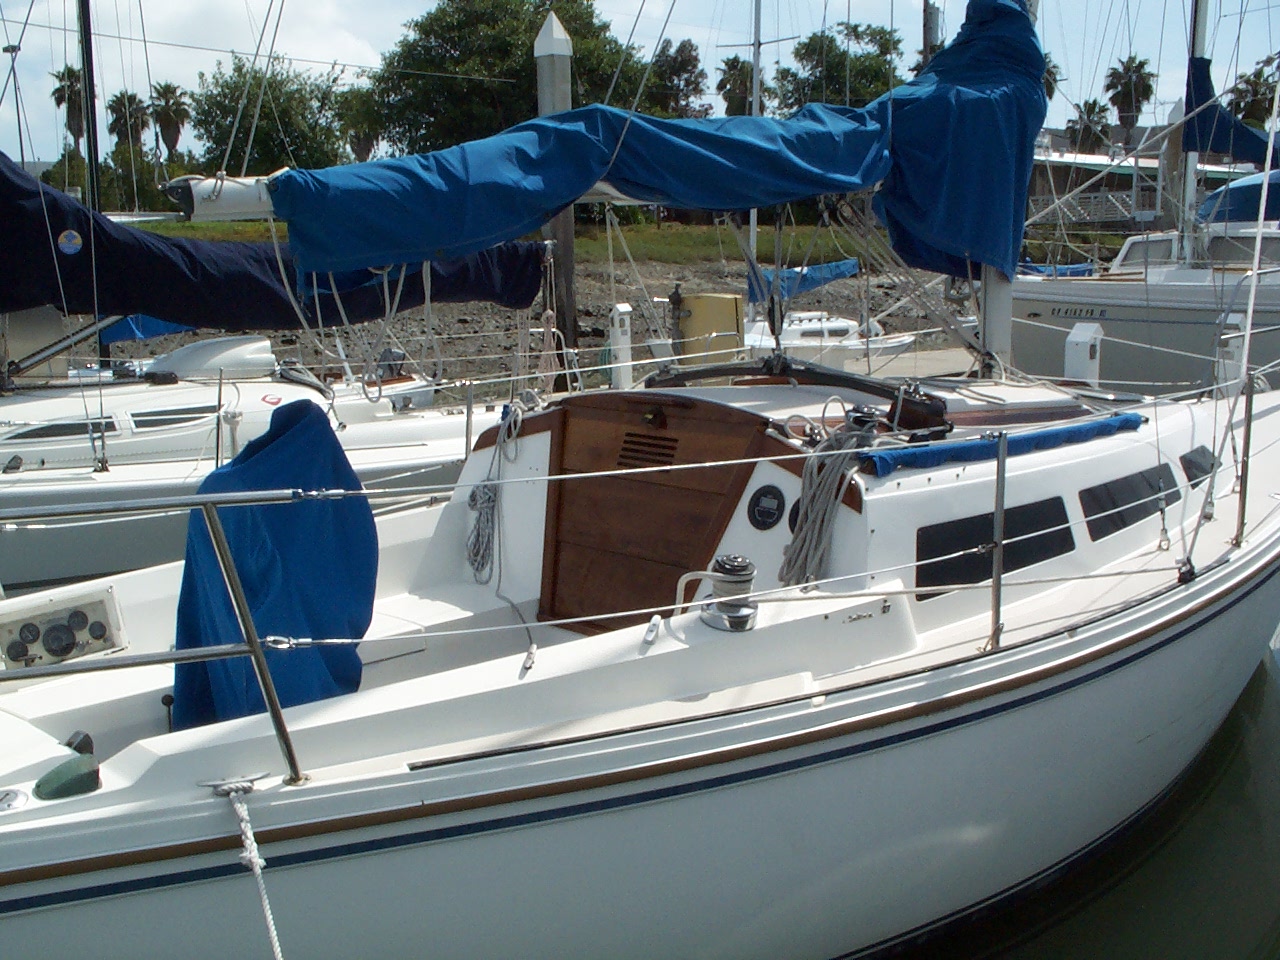 27' catalina sailboat for sale